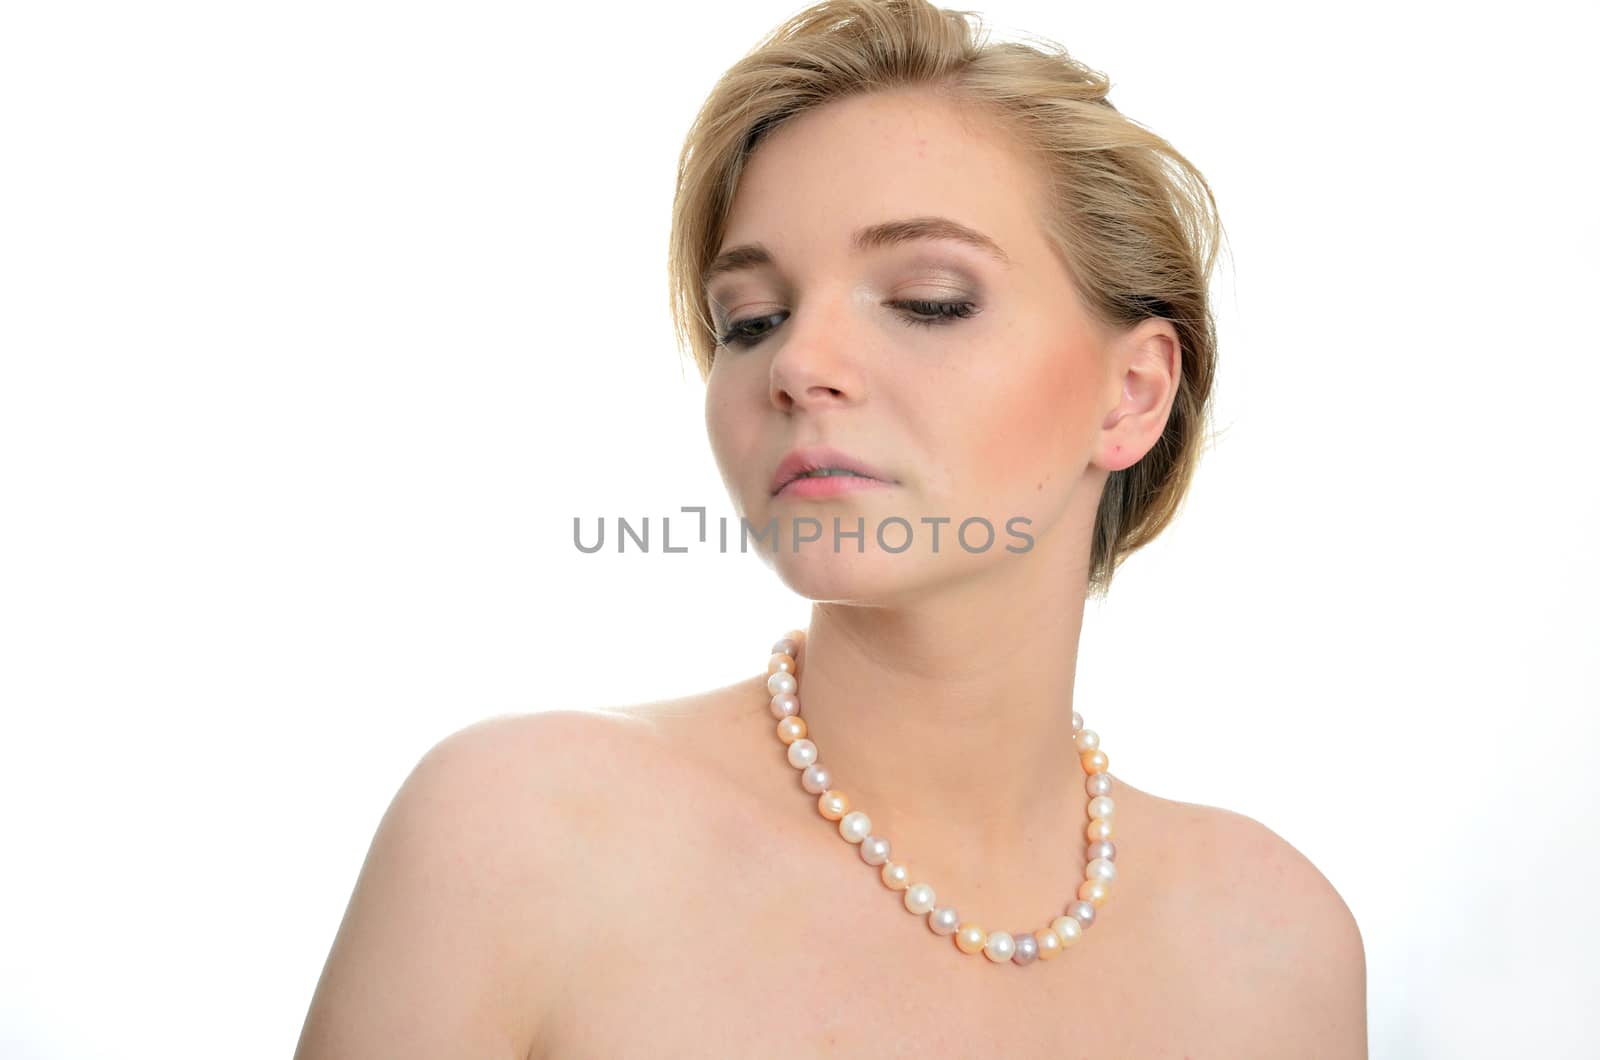 Young model wearing pealrs necklace. Female model with proud face expression.